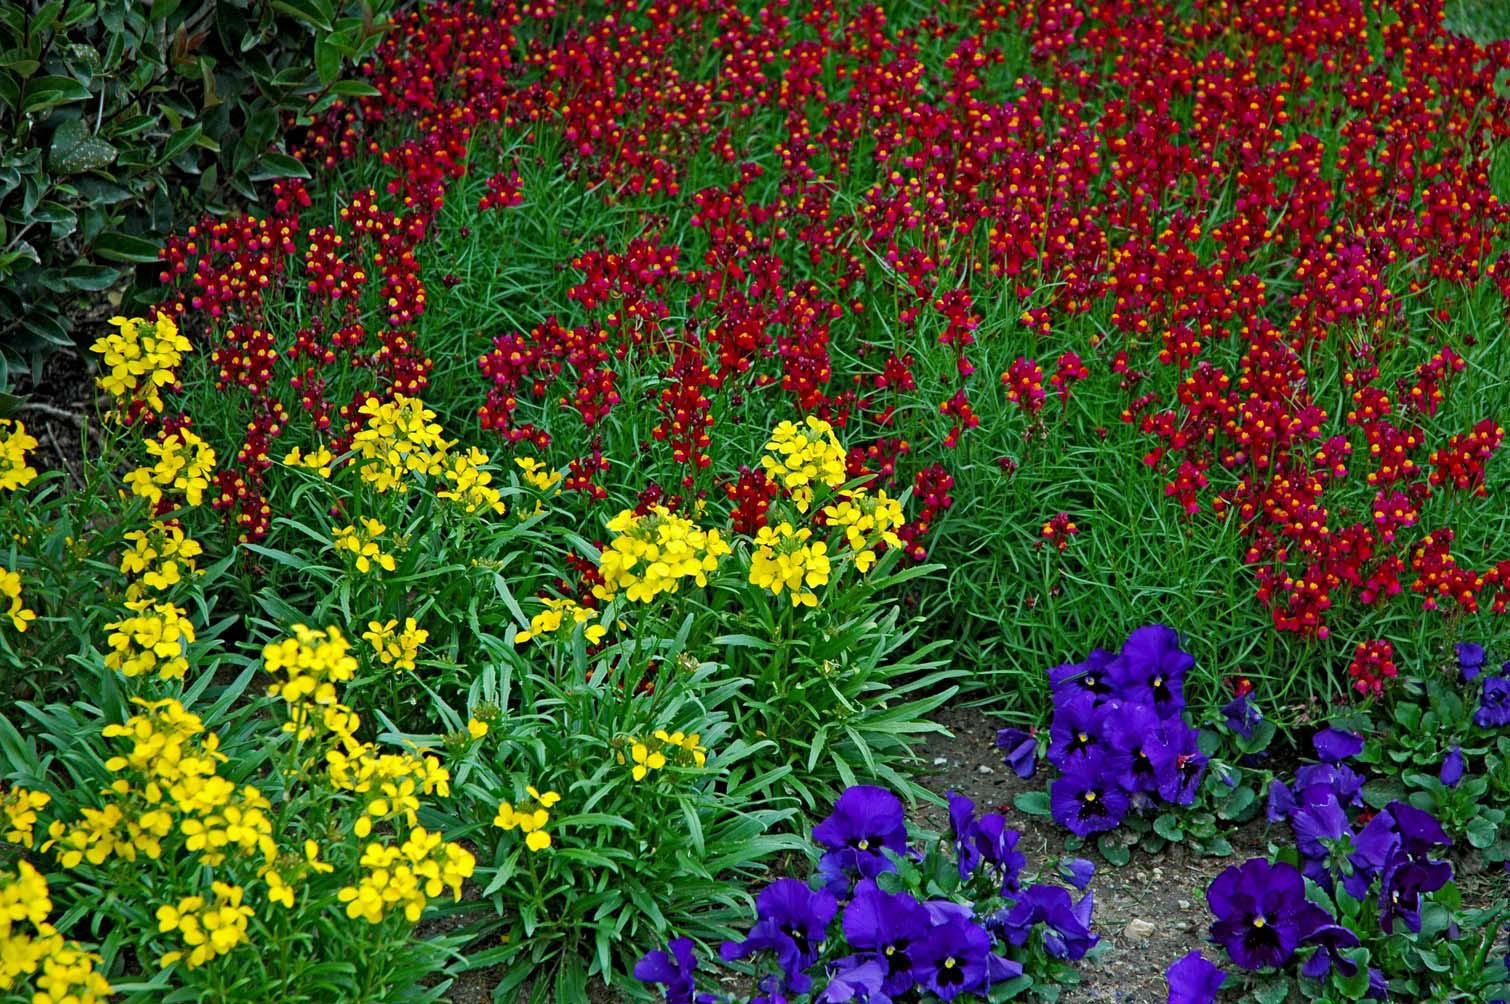 Cool-season flowers bring an abundance of color to fall gardens. Here Enchantment Linaria's very fragrant blooms of intense magenta and gold blend with Citrona Yellow erysimum and  Matrix Blue pansies in the foreground.